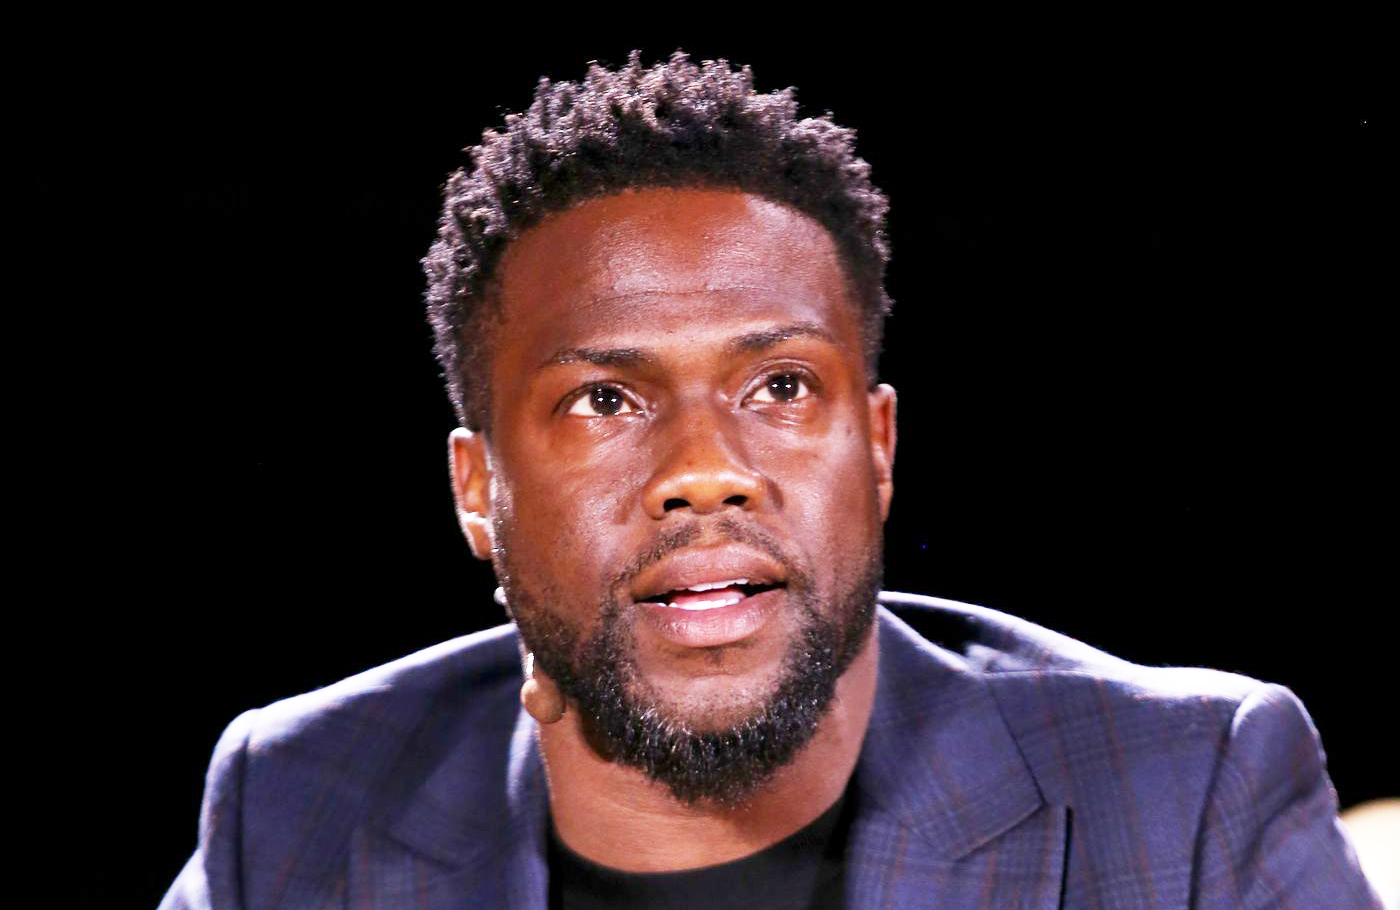 Completed sex tape scandal case between Kevin Hart and J.T. Jackson